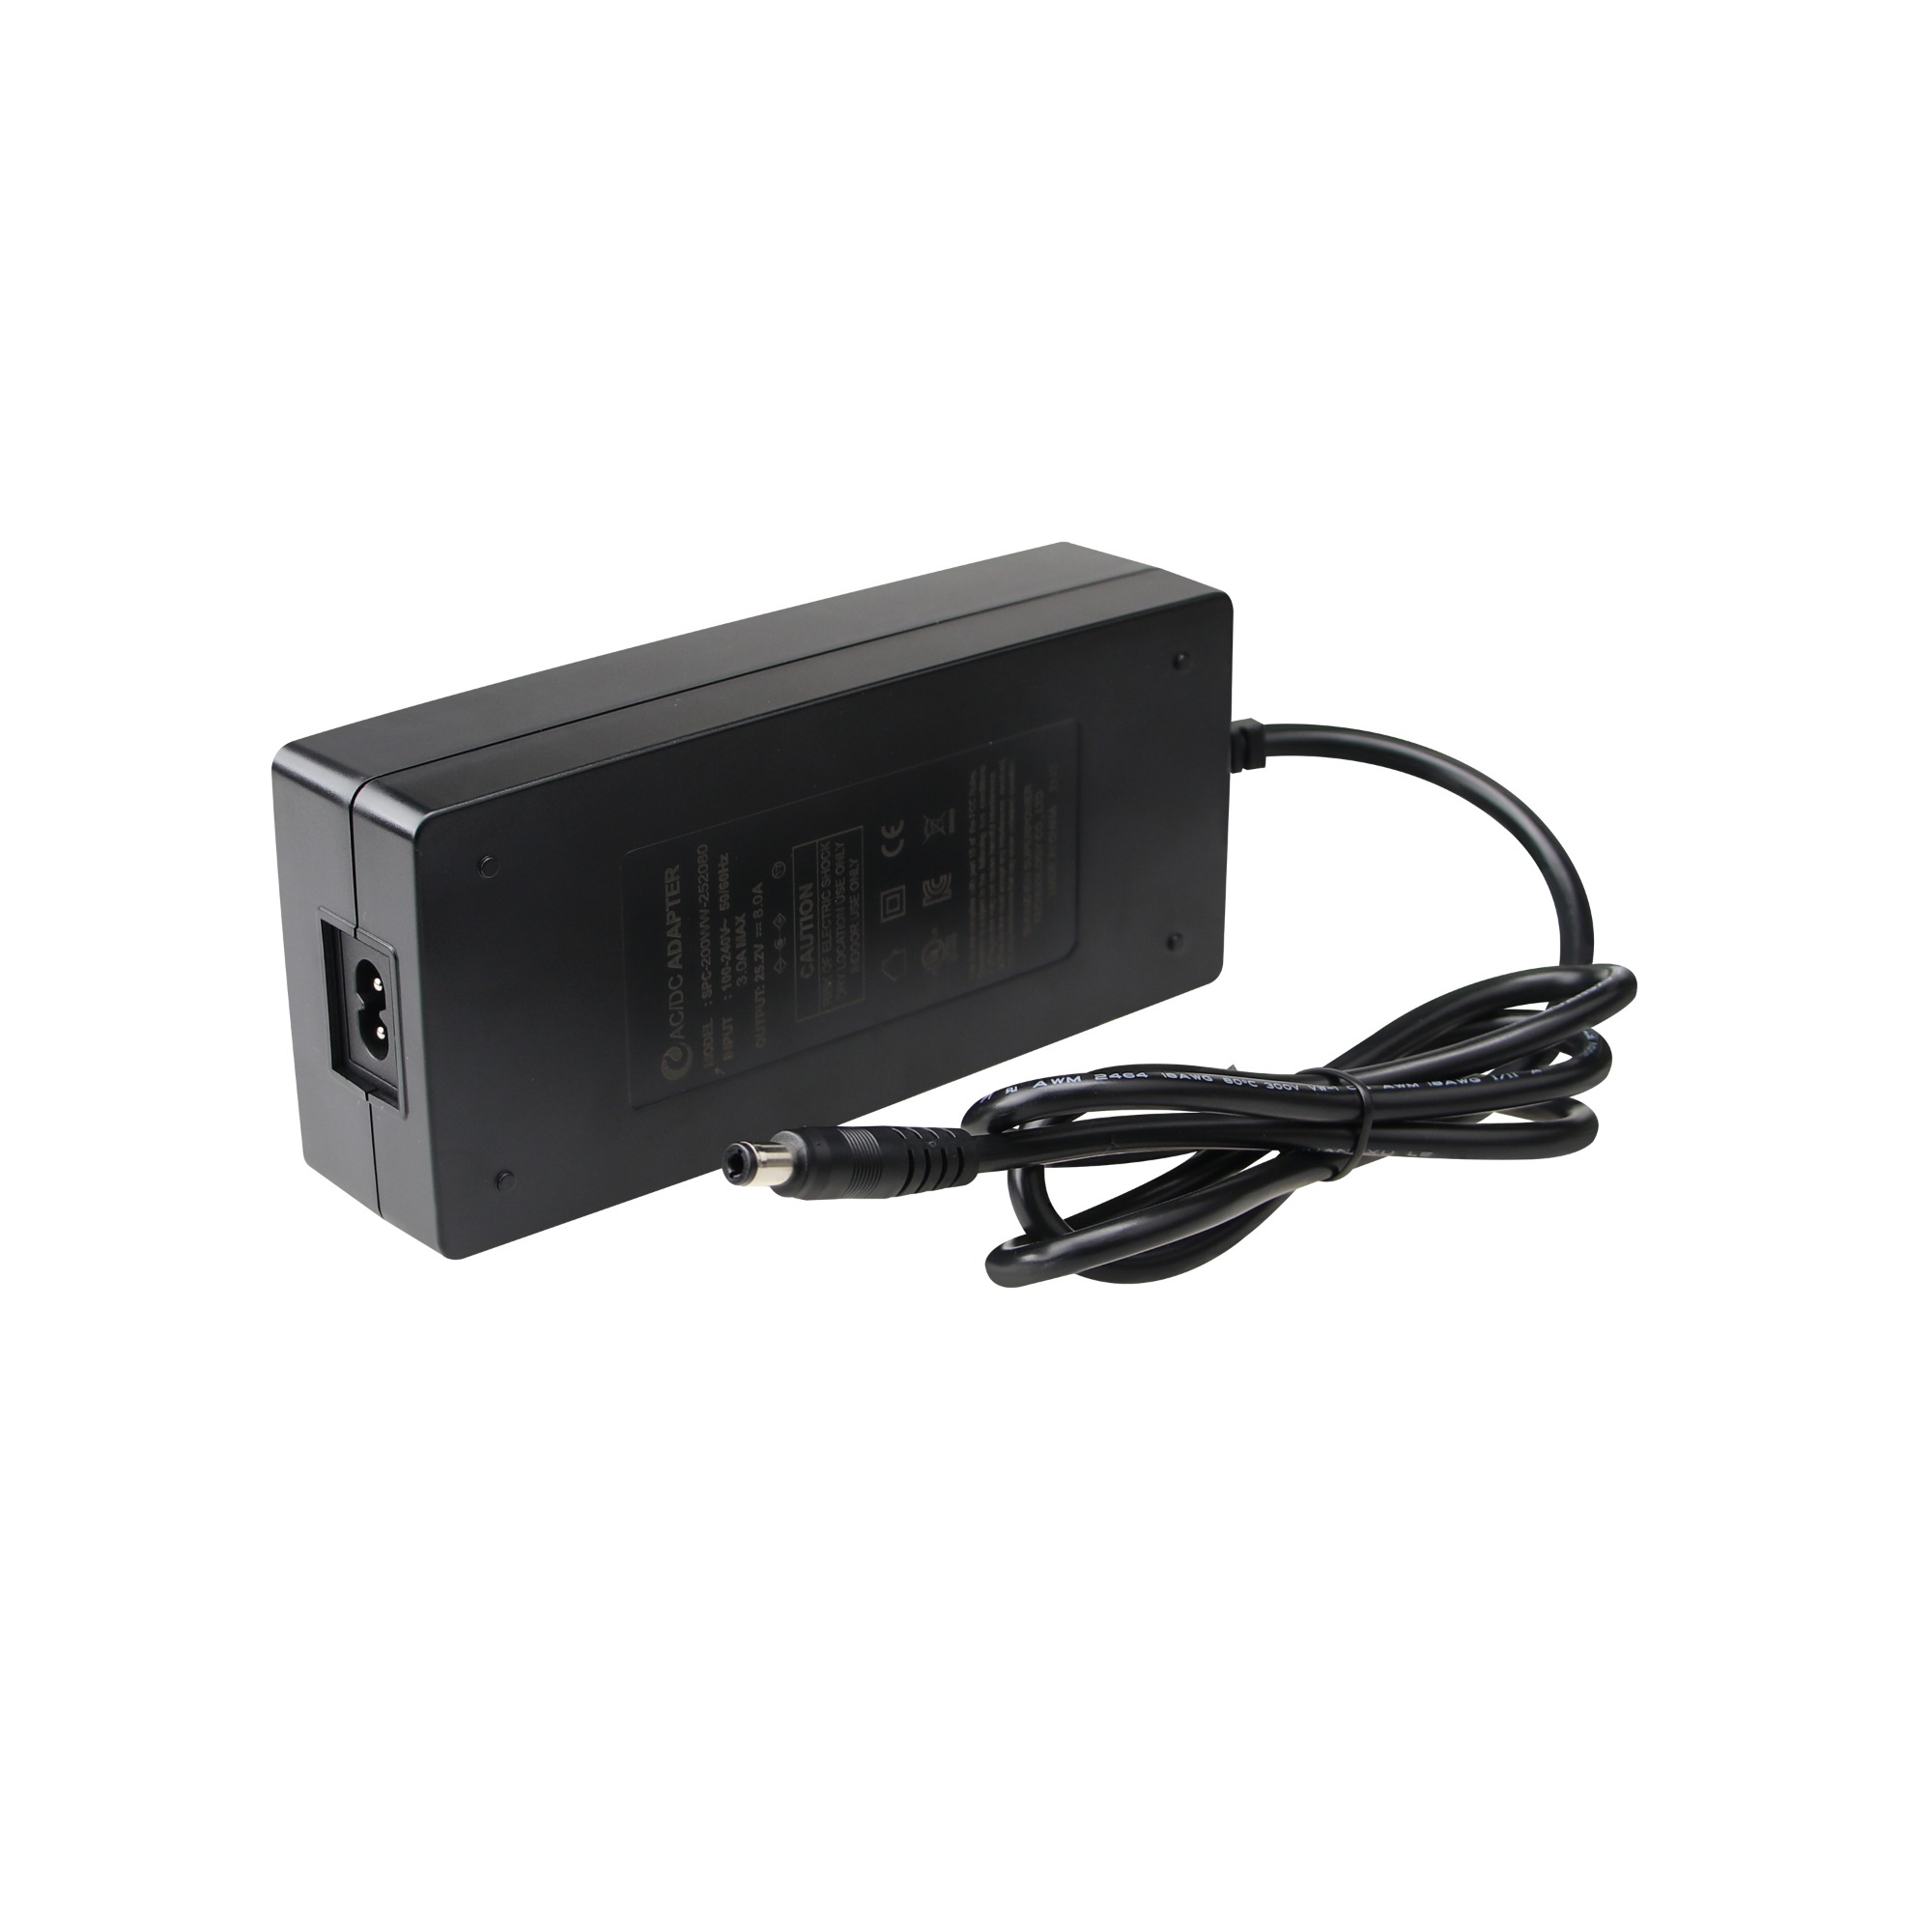 Smart charger 42V 2A Lithium battery charger For 36V 10S Li-ion Battery charger Electric Scooter E-bike motorcycle